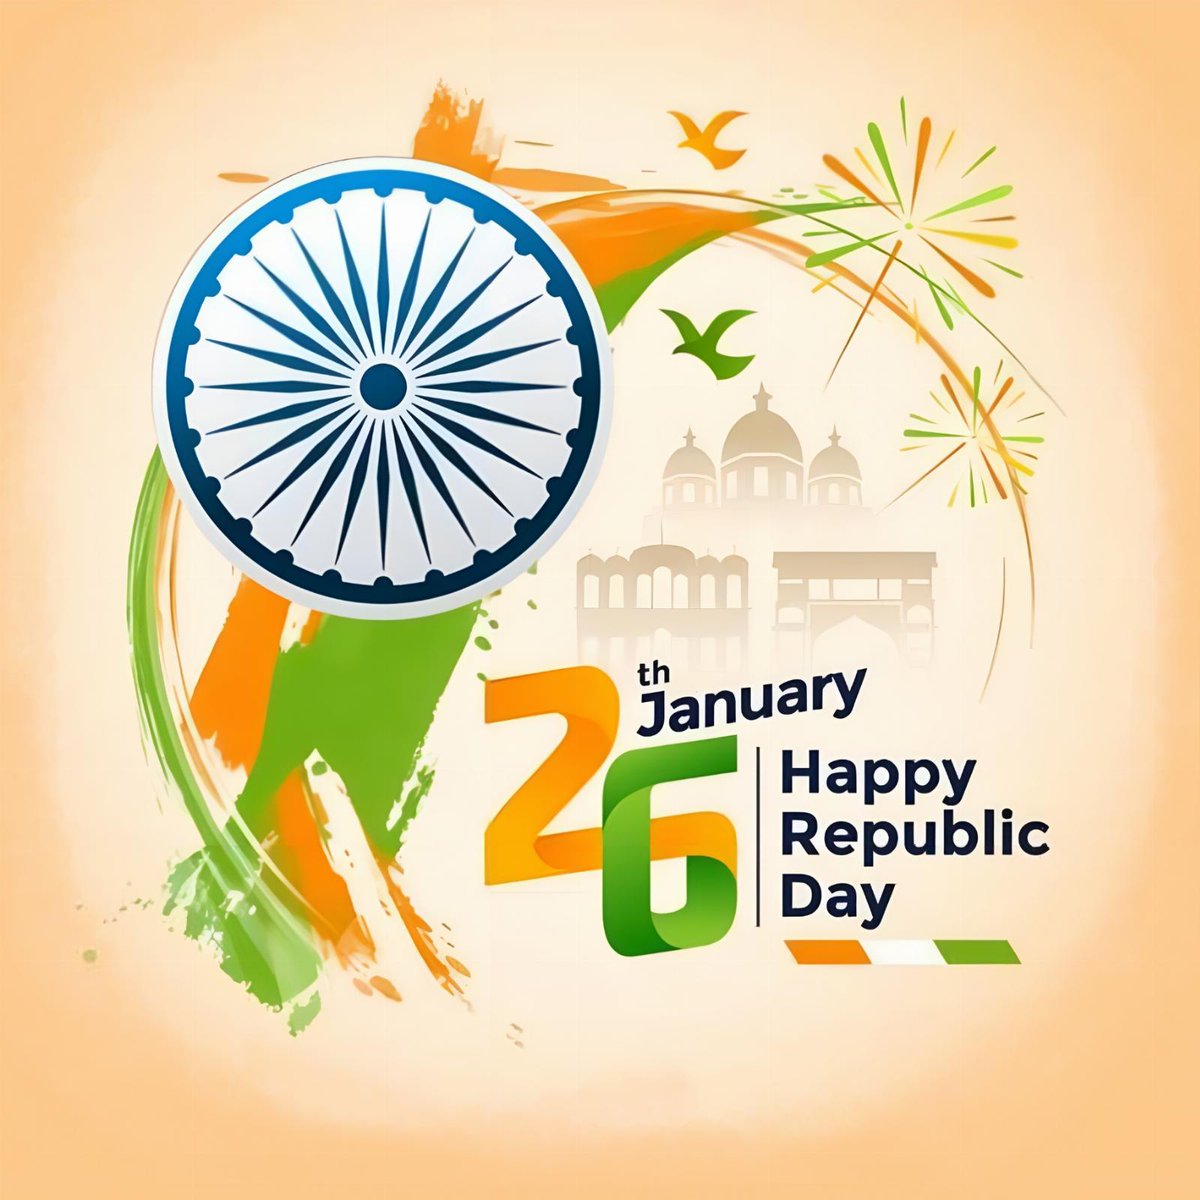 Happy Republic Day 🇮🇳 Wishing the people of India a dignified and joyous Republic Day 2024 celebration! May the values of justice, liberty, equality, and fraternity continue to guide the nation towards progress and prosperity. #RepublicDay2024 #IndiaRepublicDay